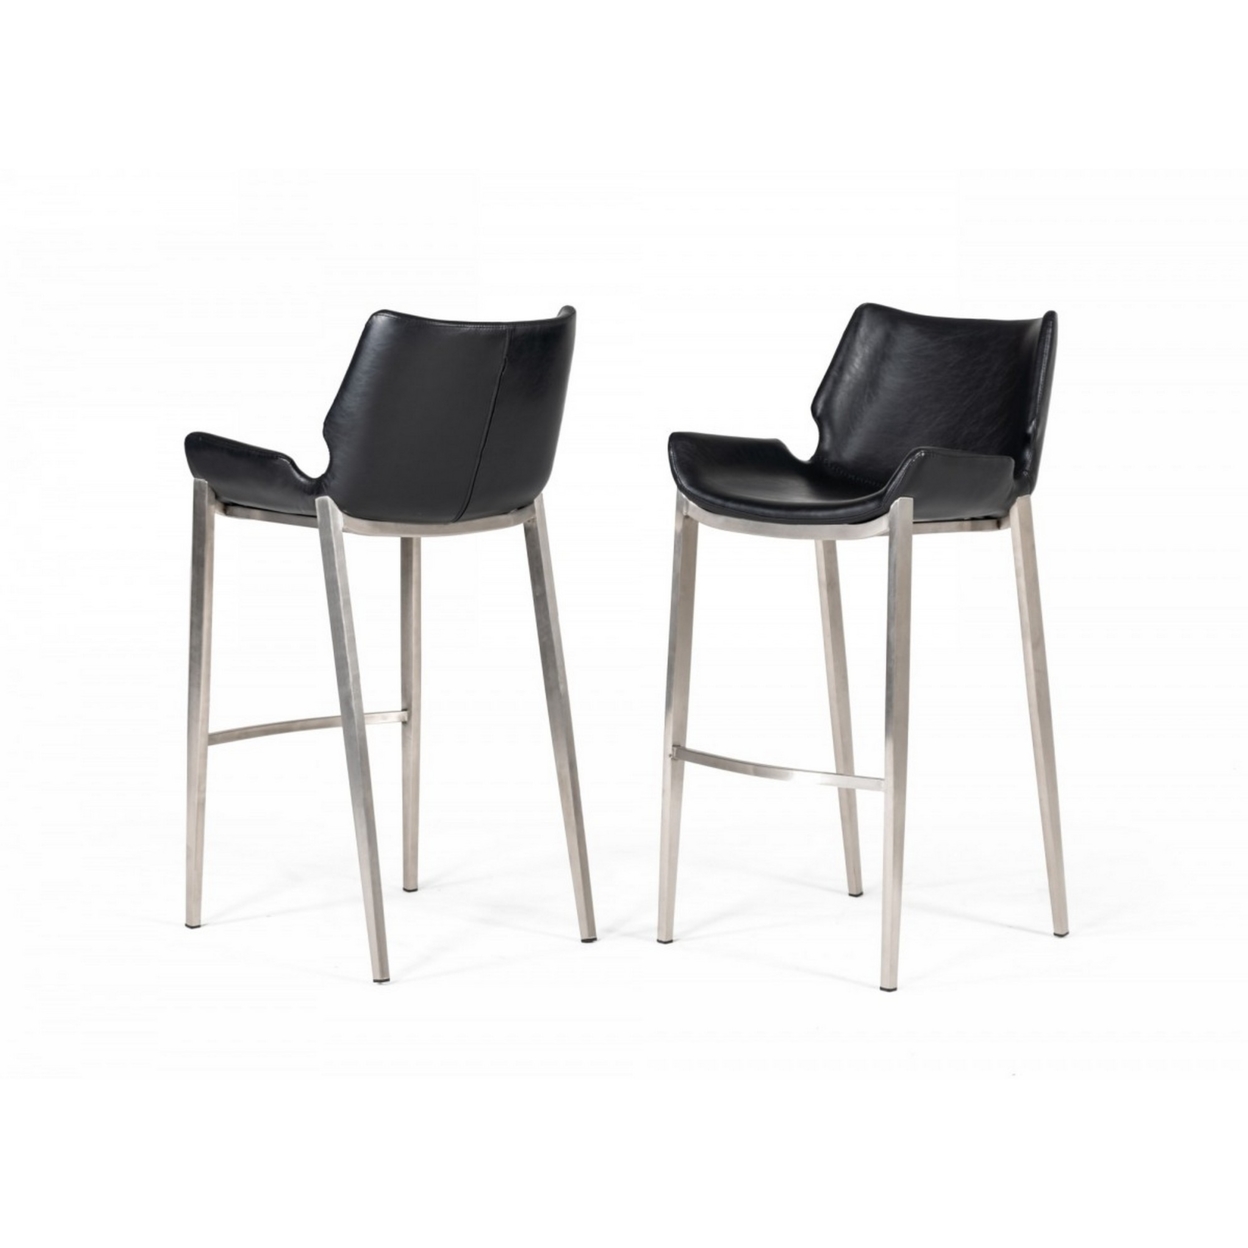 Wingback Leatherette Barstool With Metal Legs, Set Of 2, Black And Silver- Saltoro Sherpi